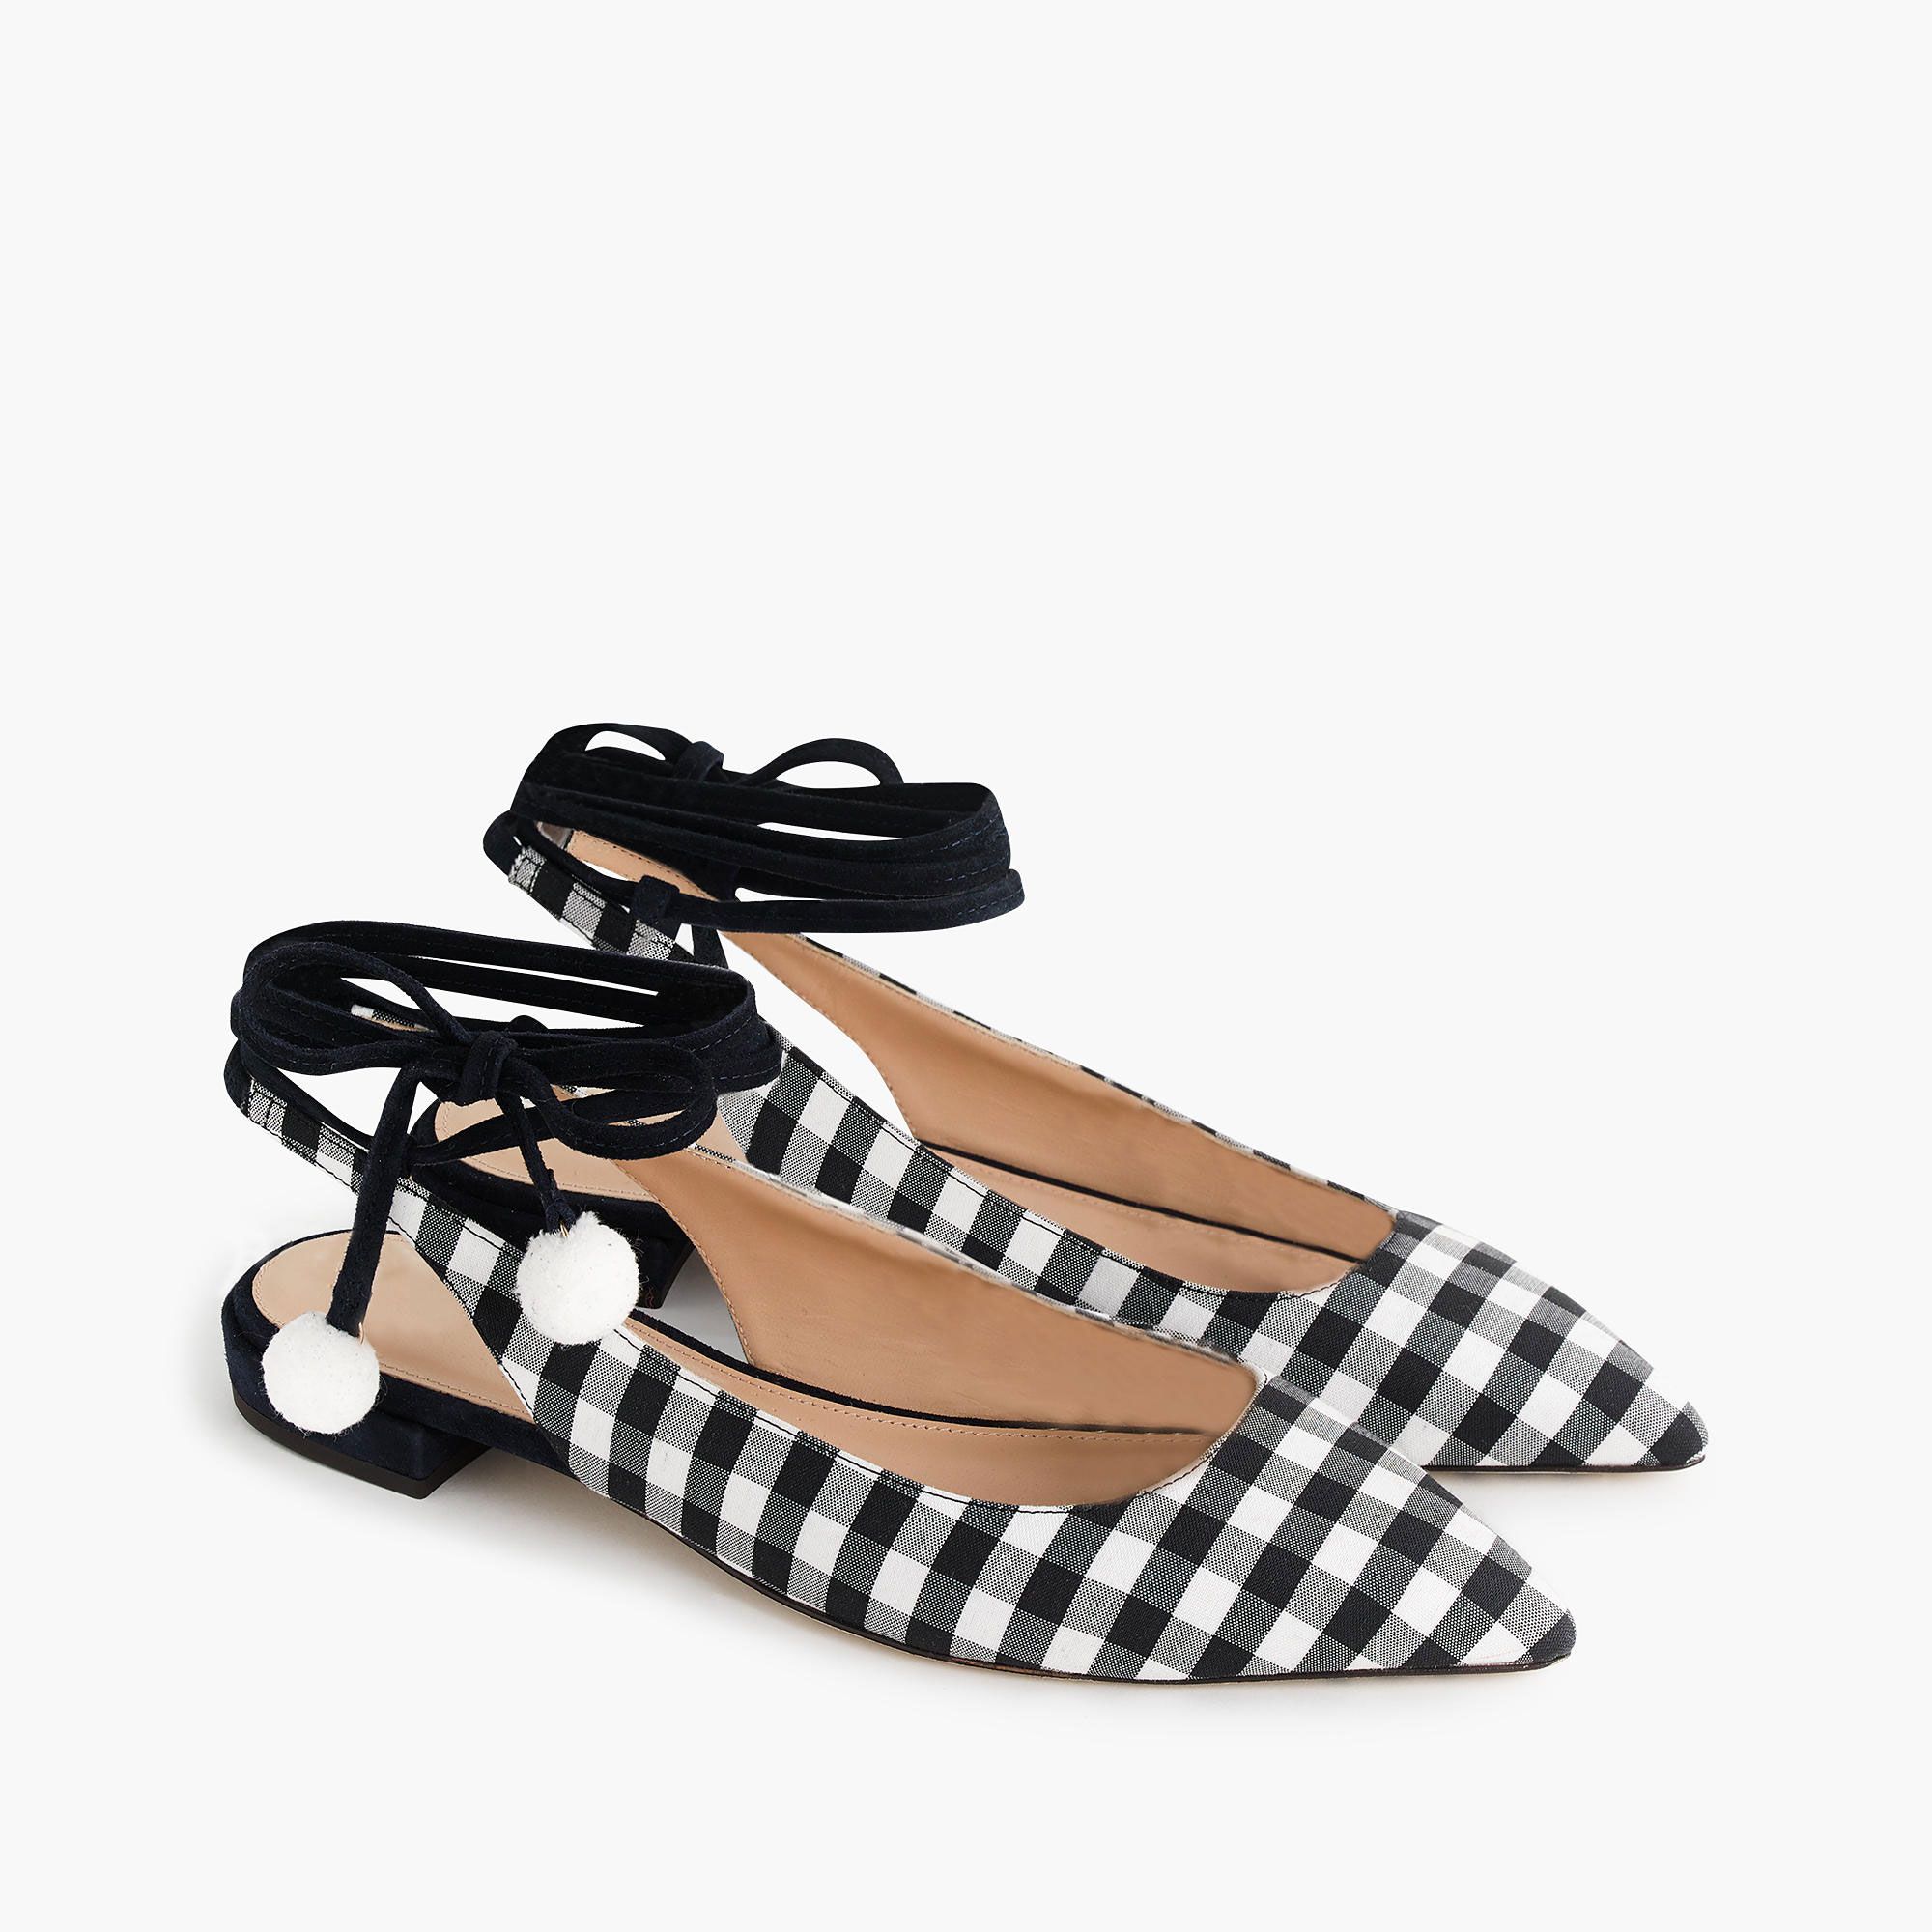 Lily Ankle-Wrap Flats in Gingham